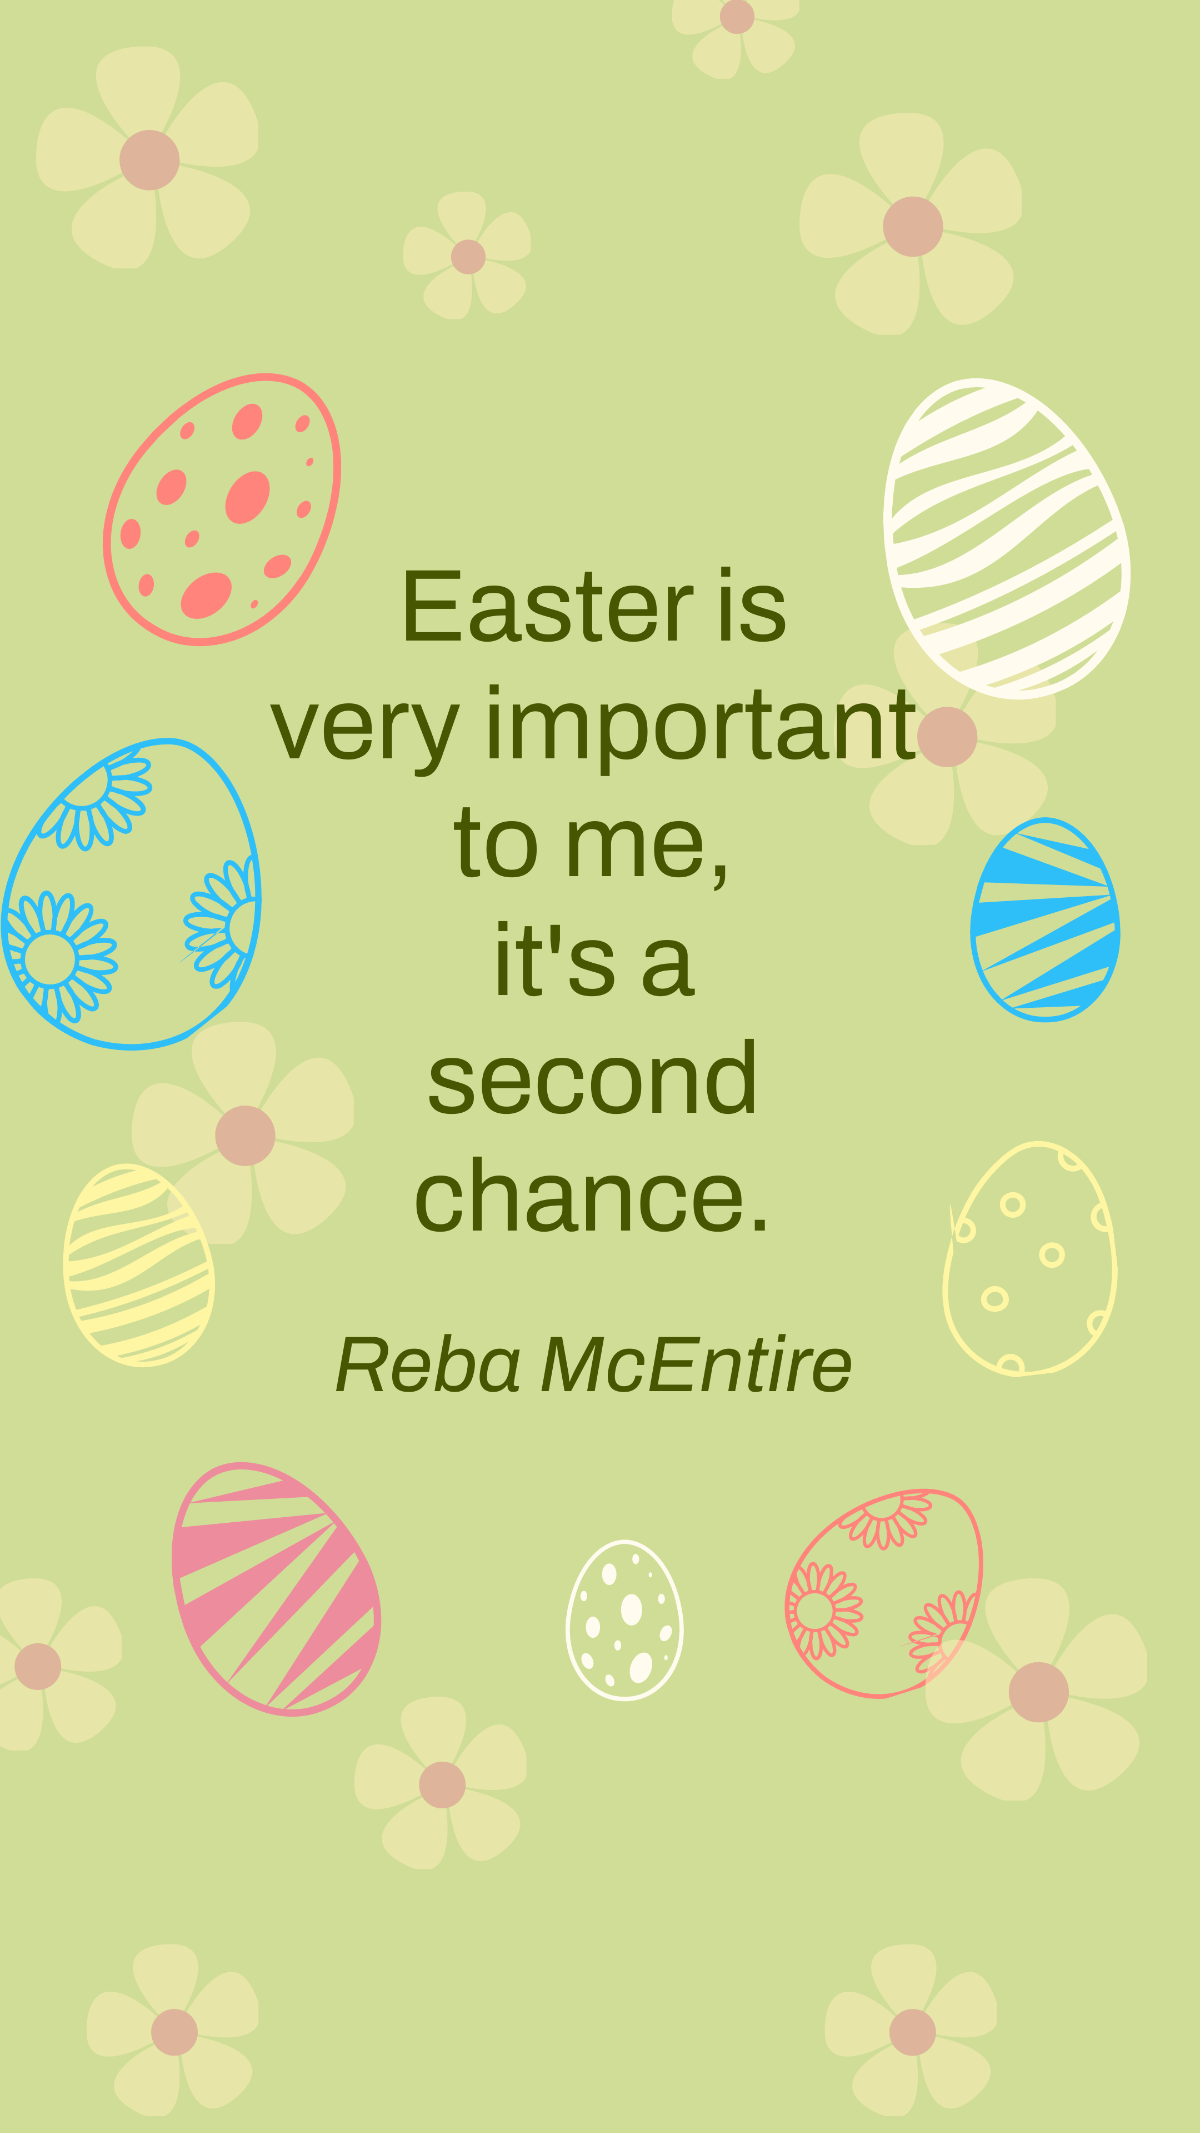 Reba McEntire - Easter is very important to me, it's a second chance. Template